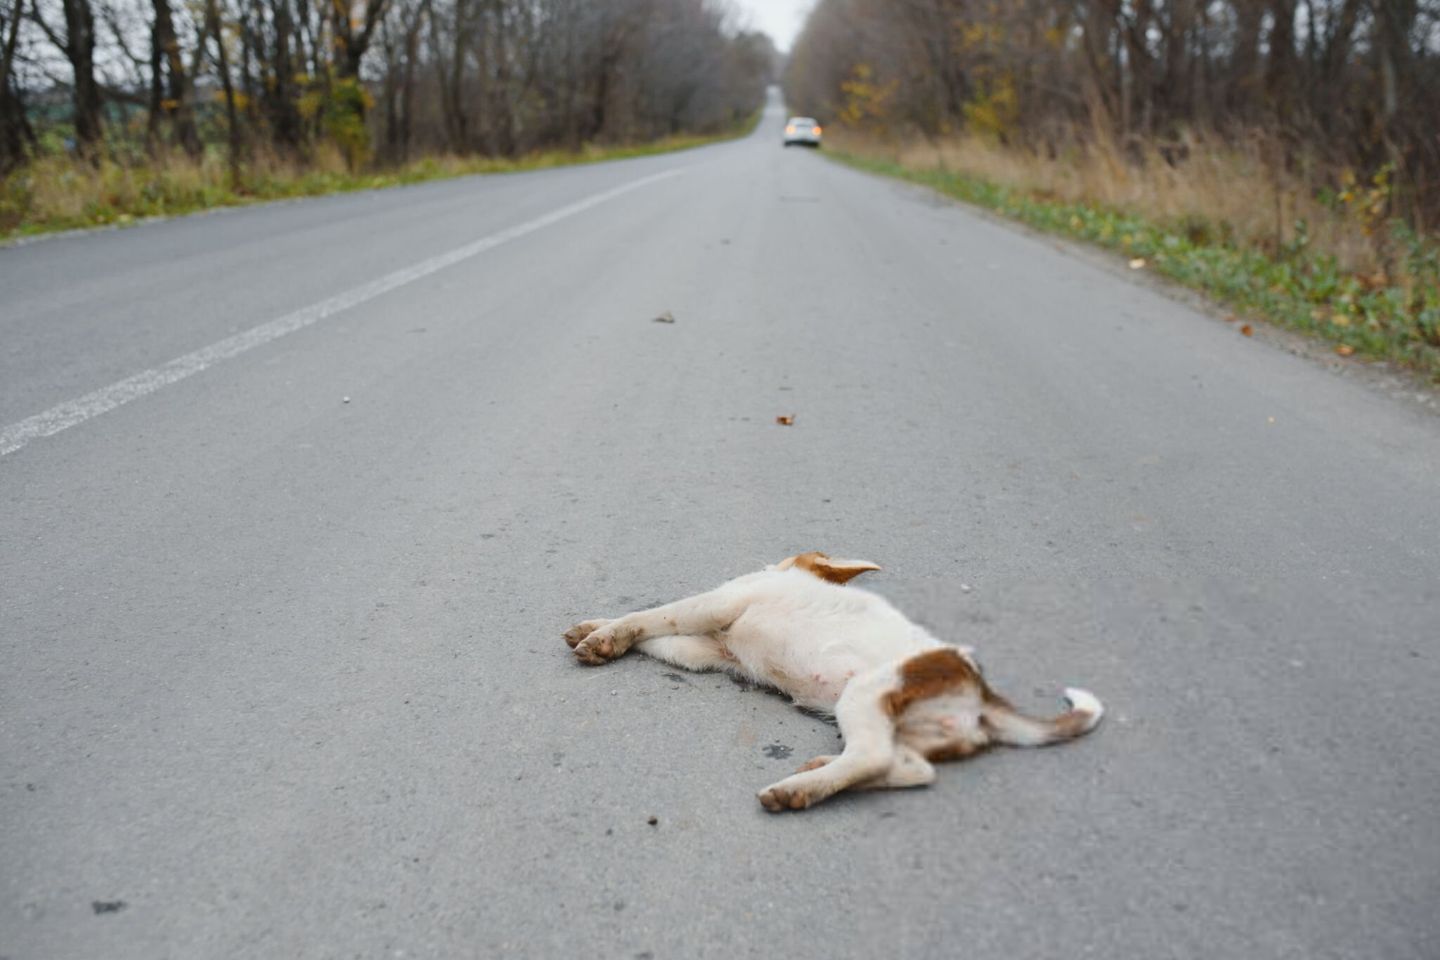 Legal Obligations After a Hit and Run Involving a Dog